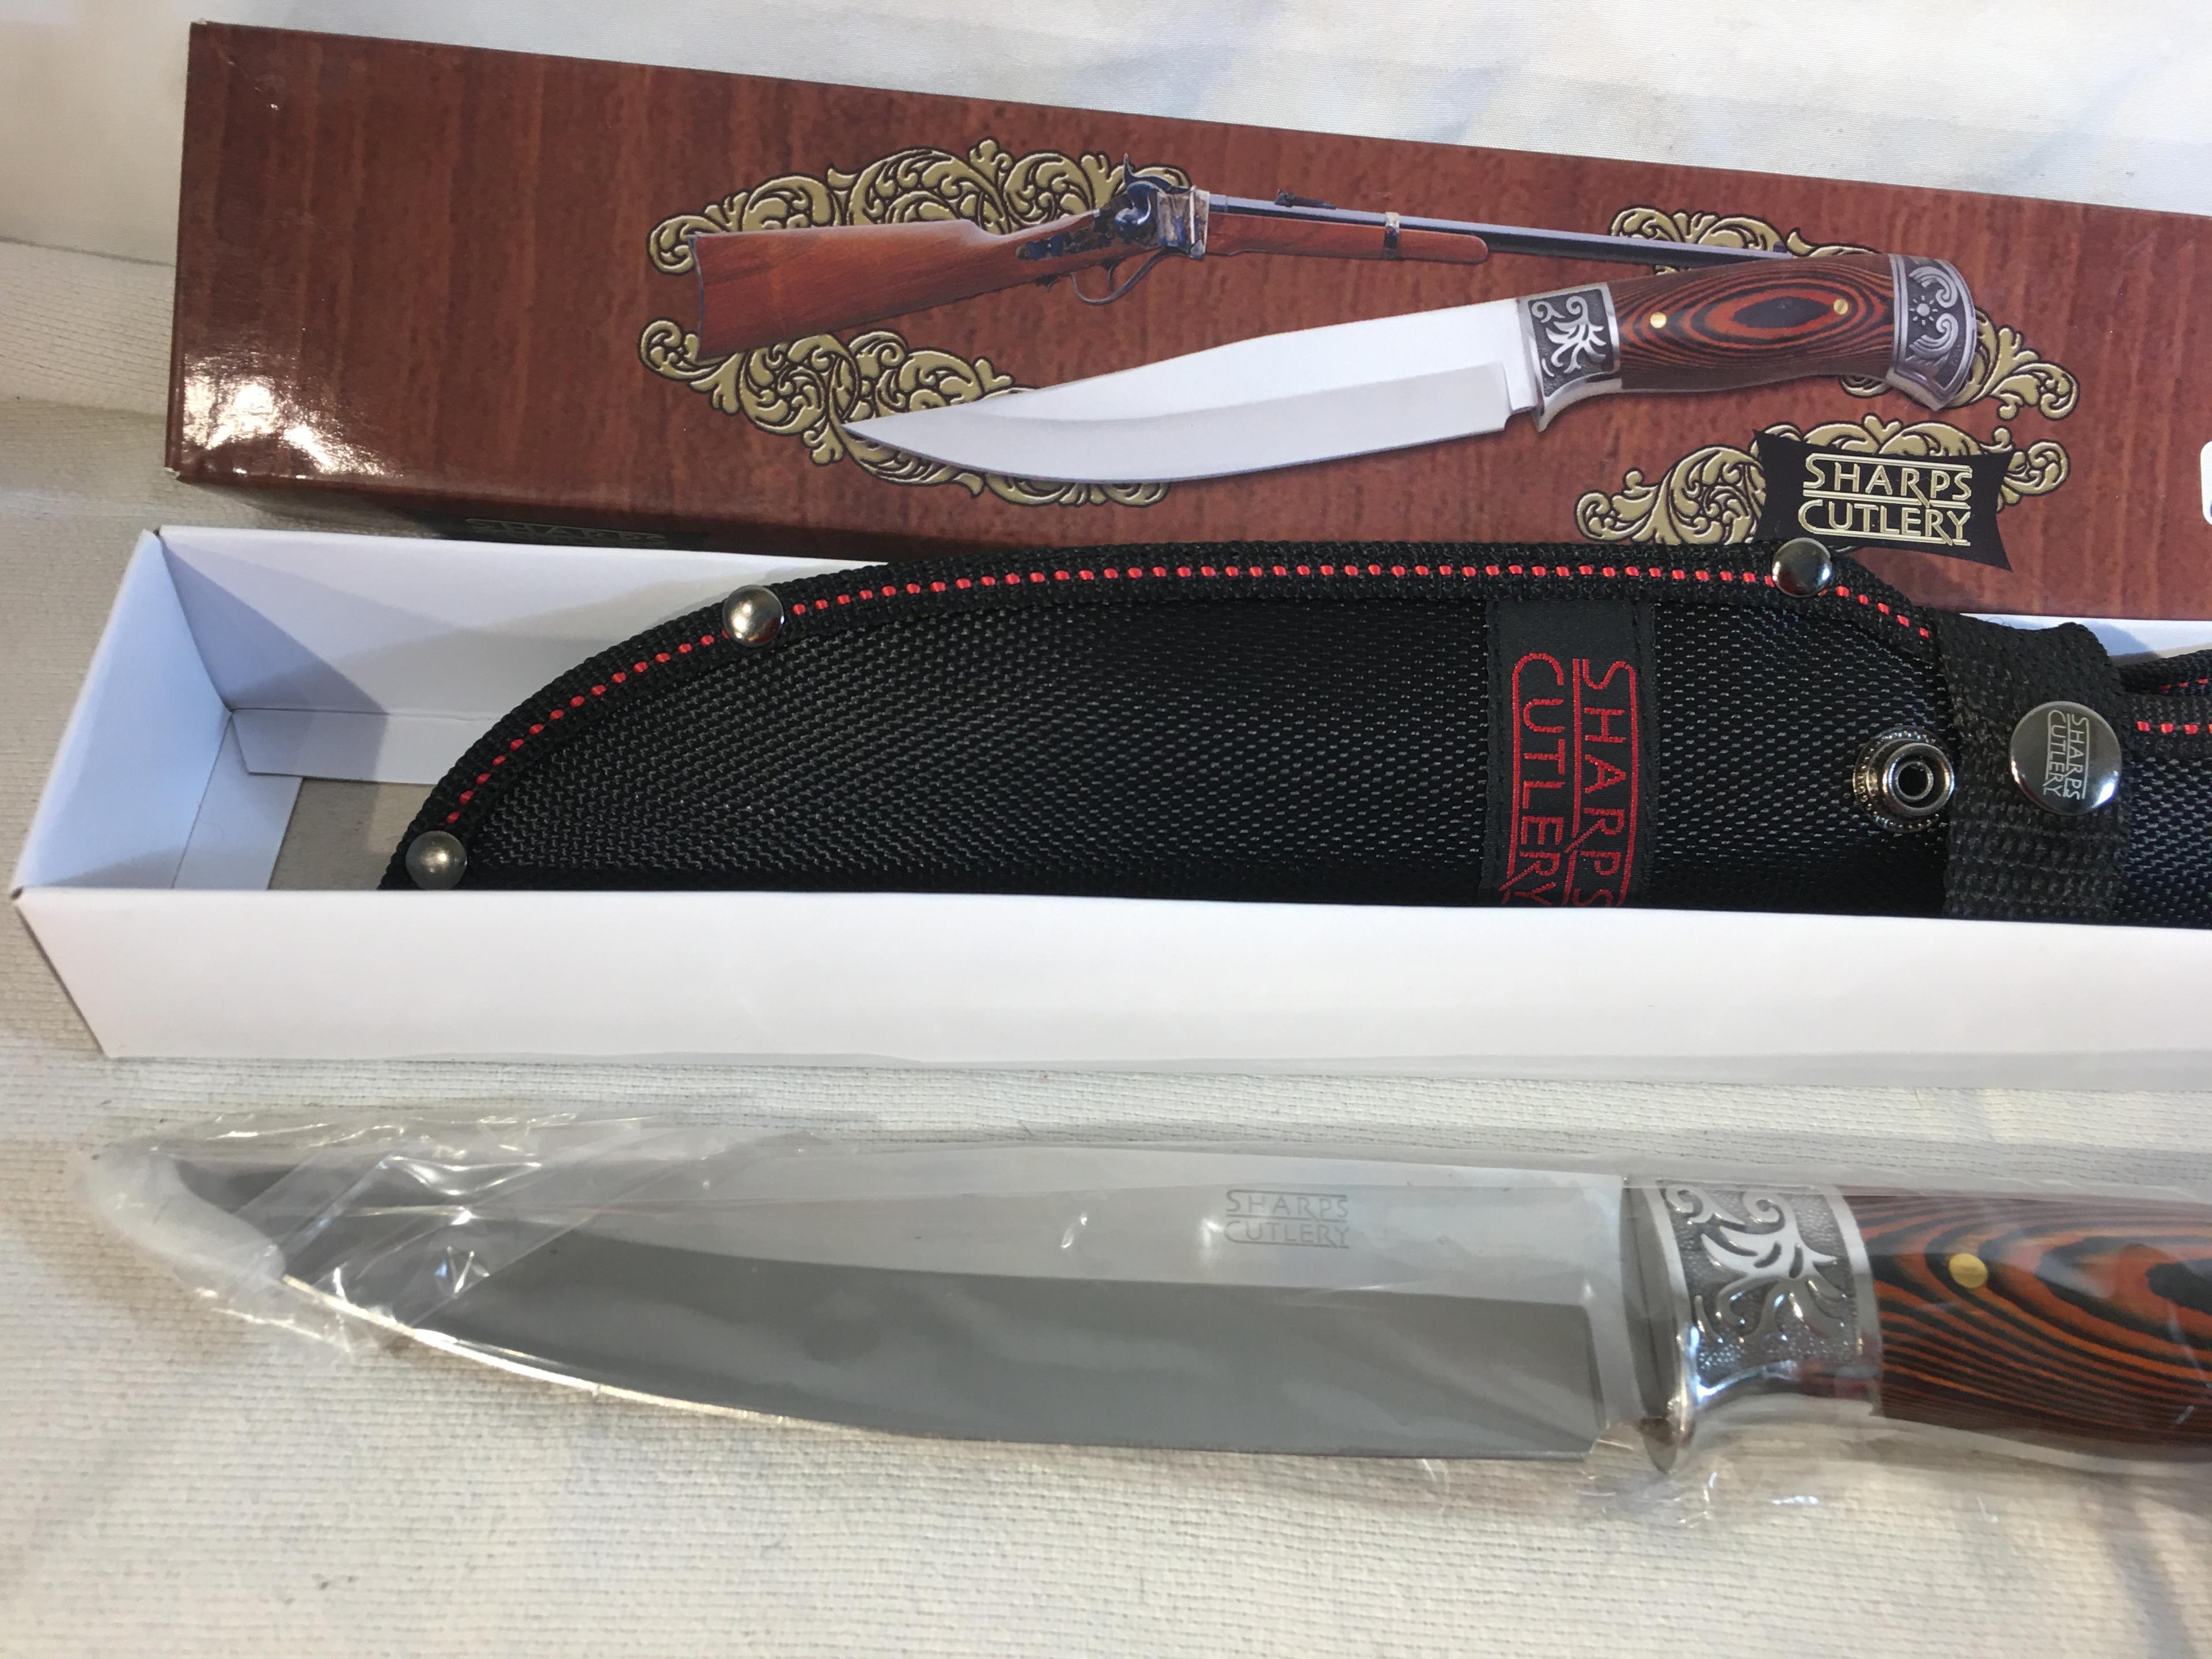 New Collector Sharps Cutlery SHP-014 Knive 12"Overall Length 3CR13 Stainless Steel Knife -See Photos